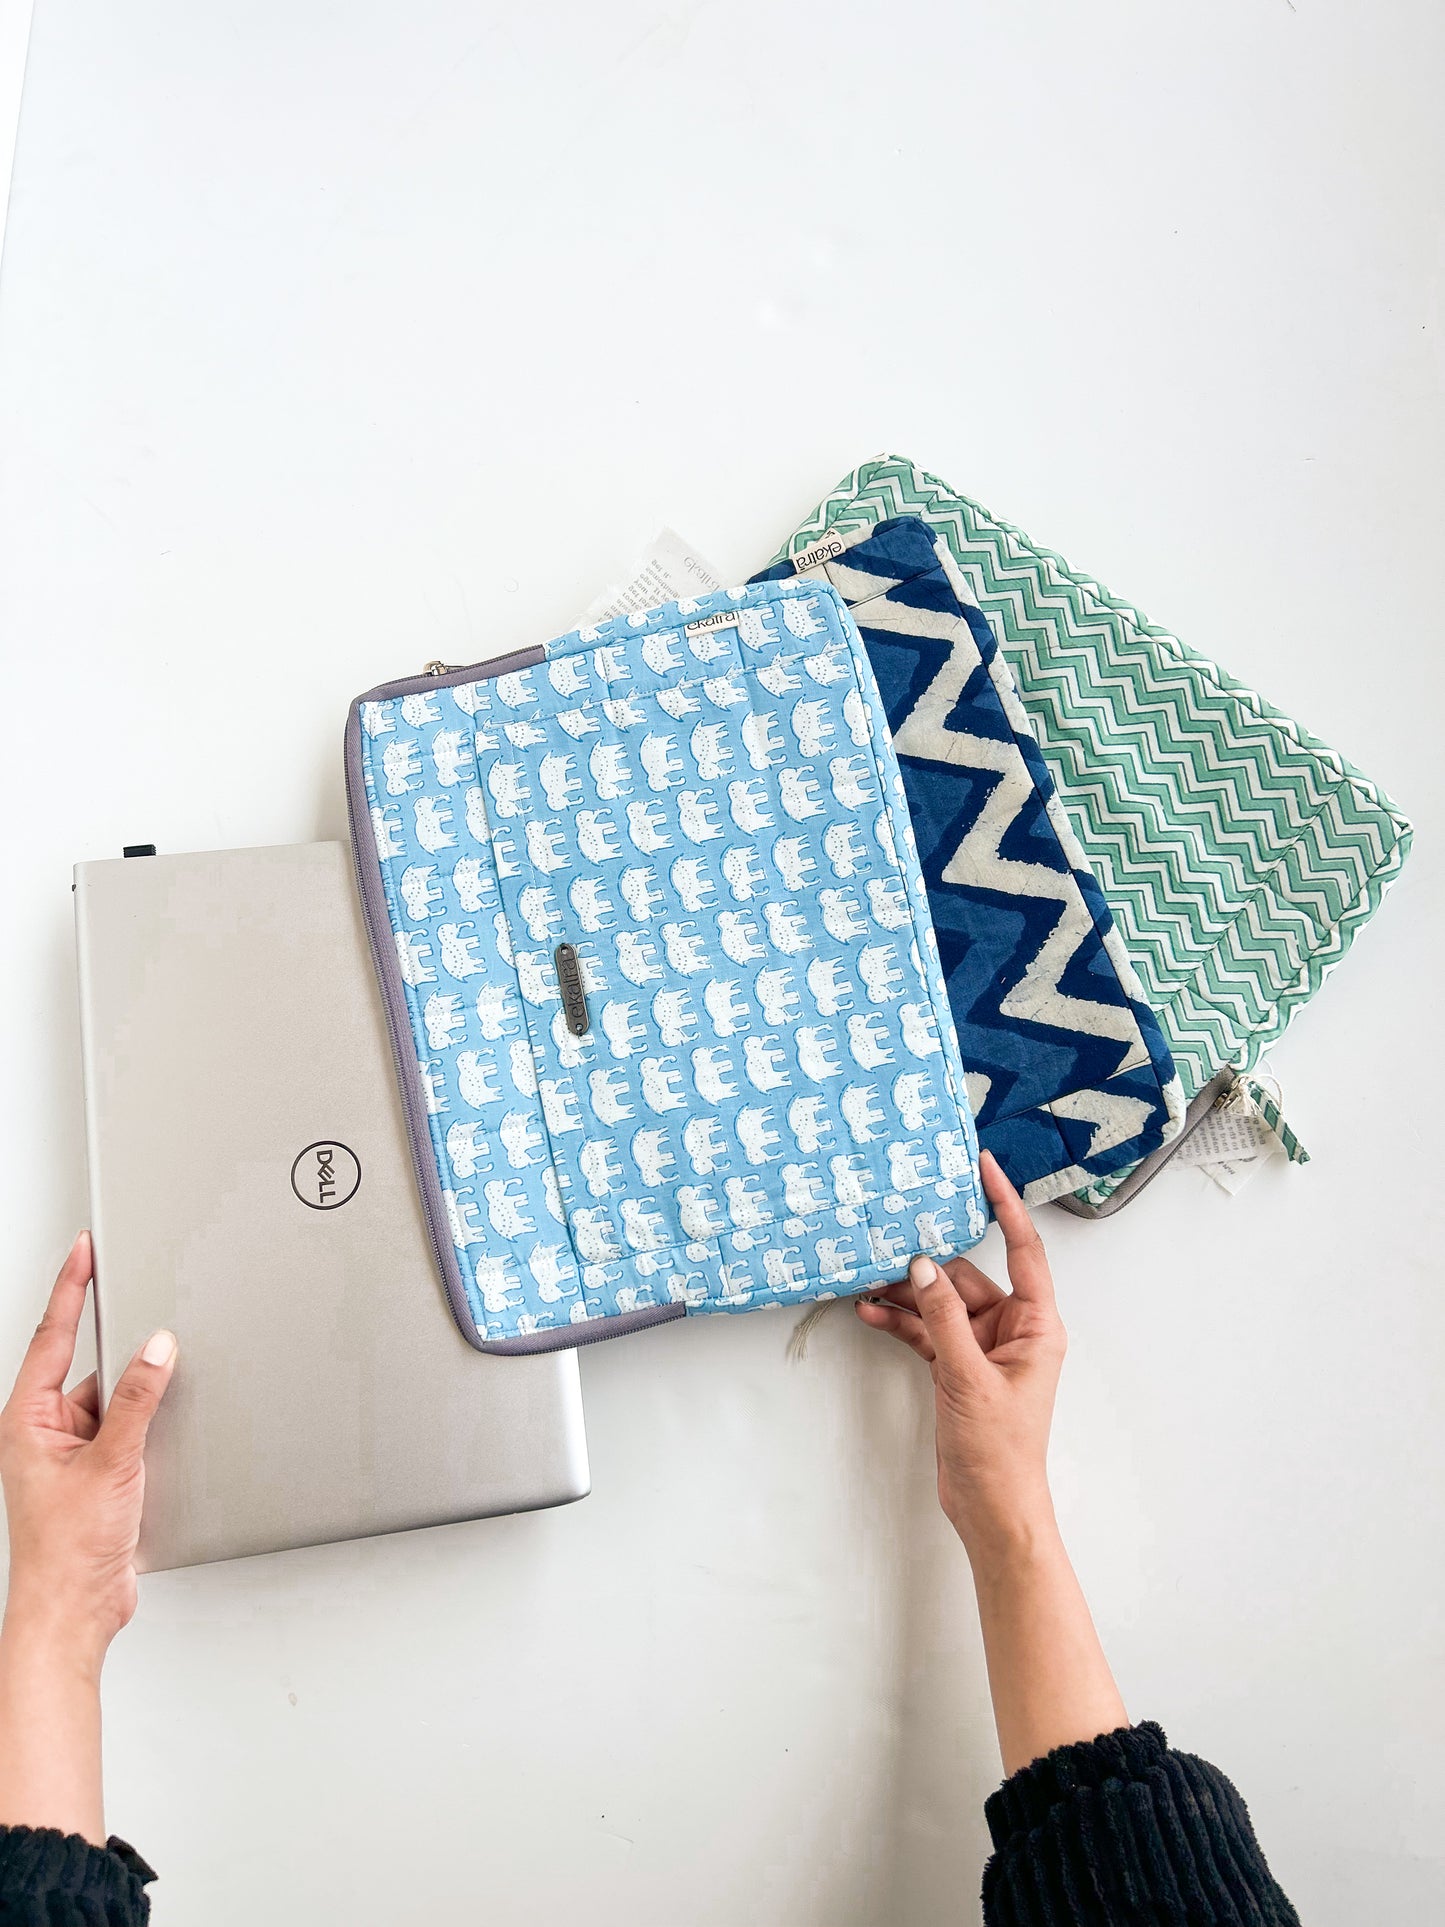 Sustainable Handmade Cotton Laptop Sleeve/Laptop Cover by Ekatra - Green Floral